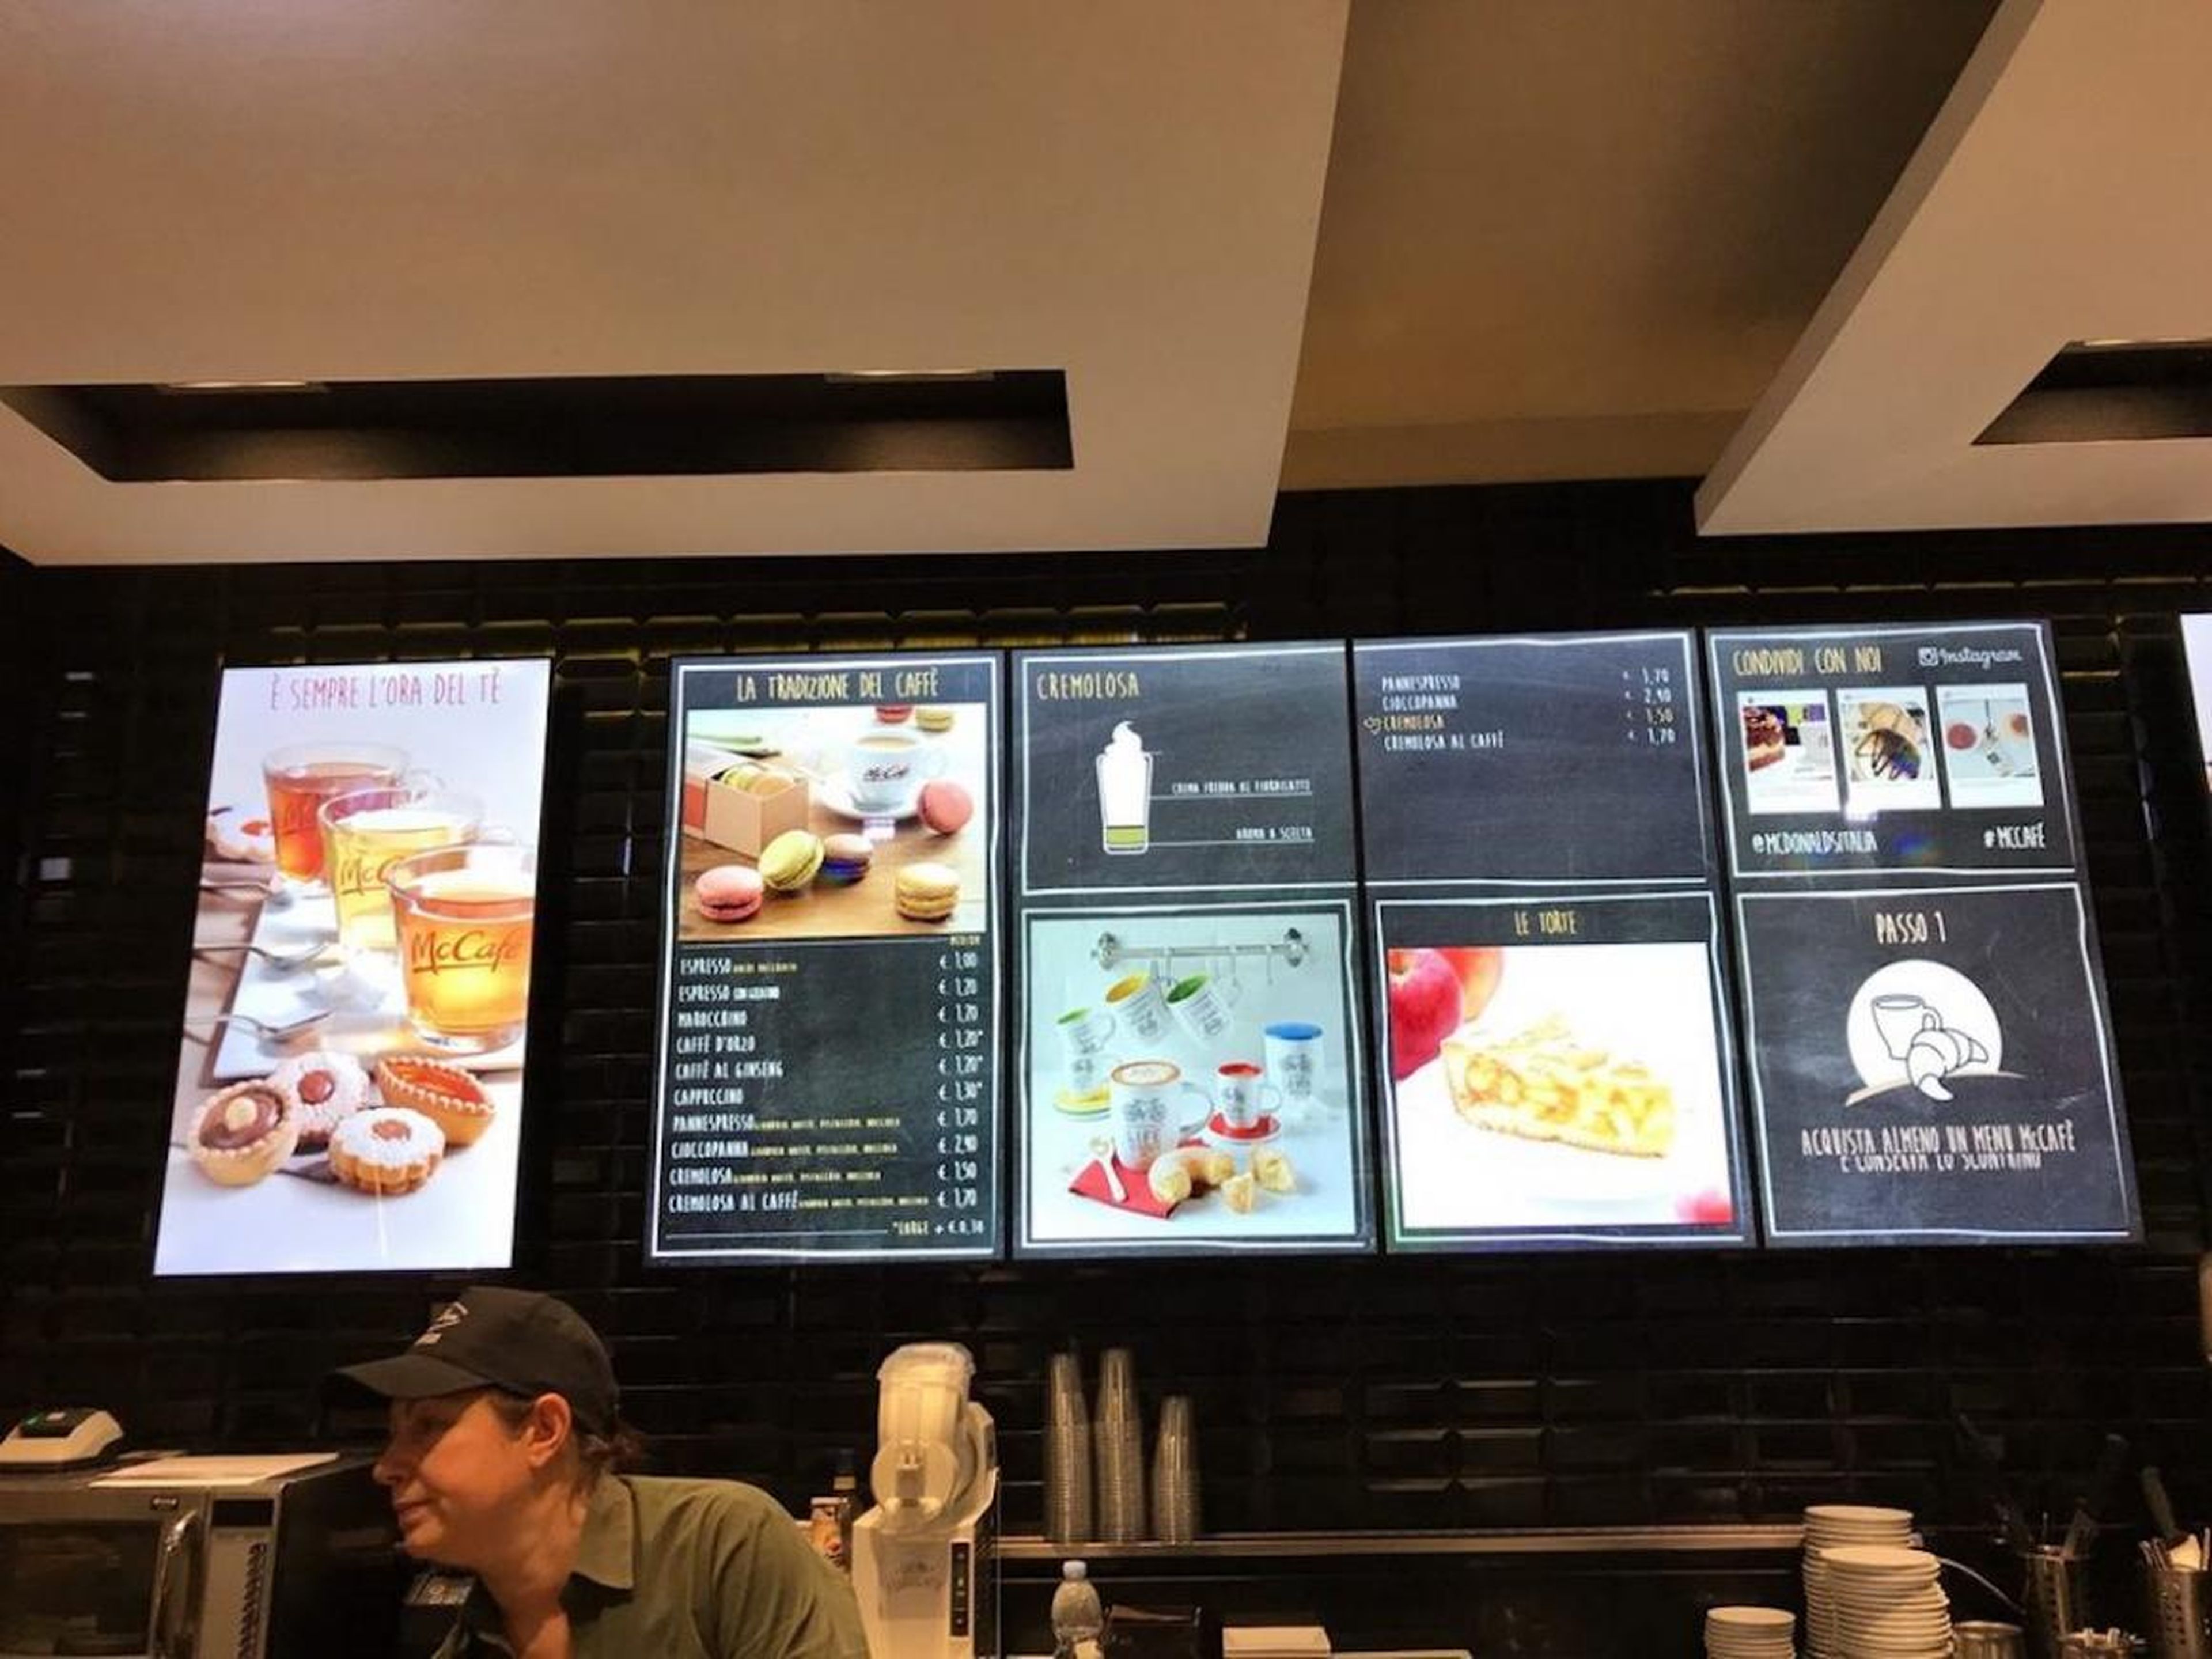 The menu looks pretty different from your typical McDonald's ...